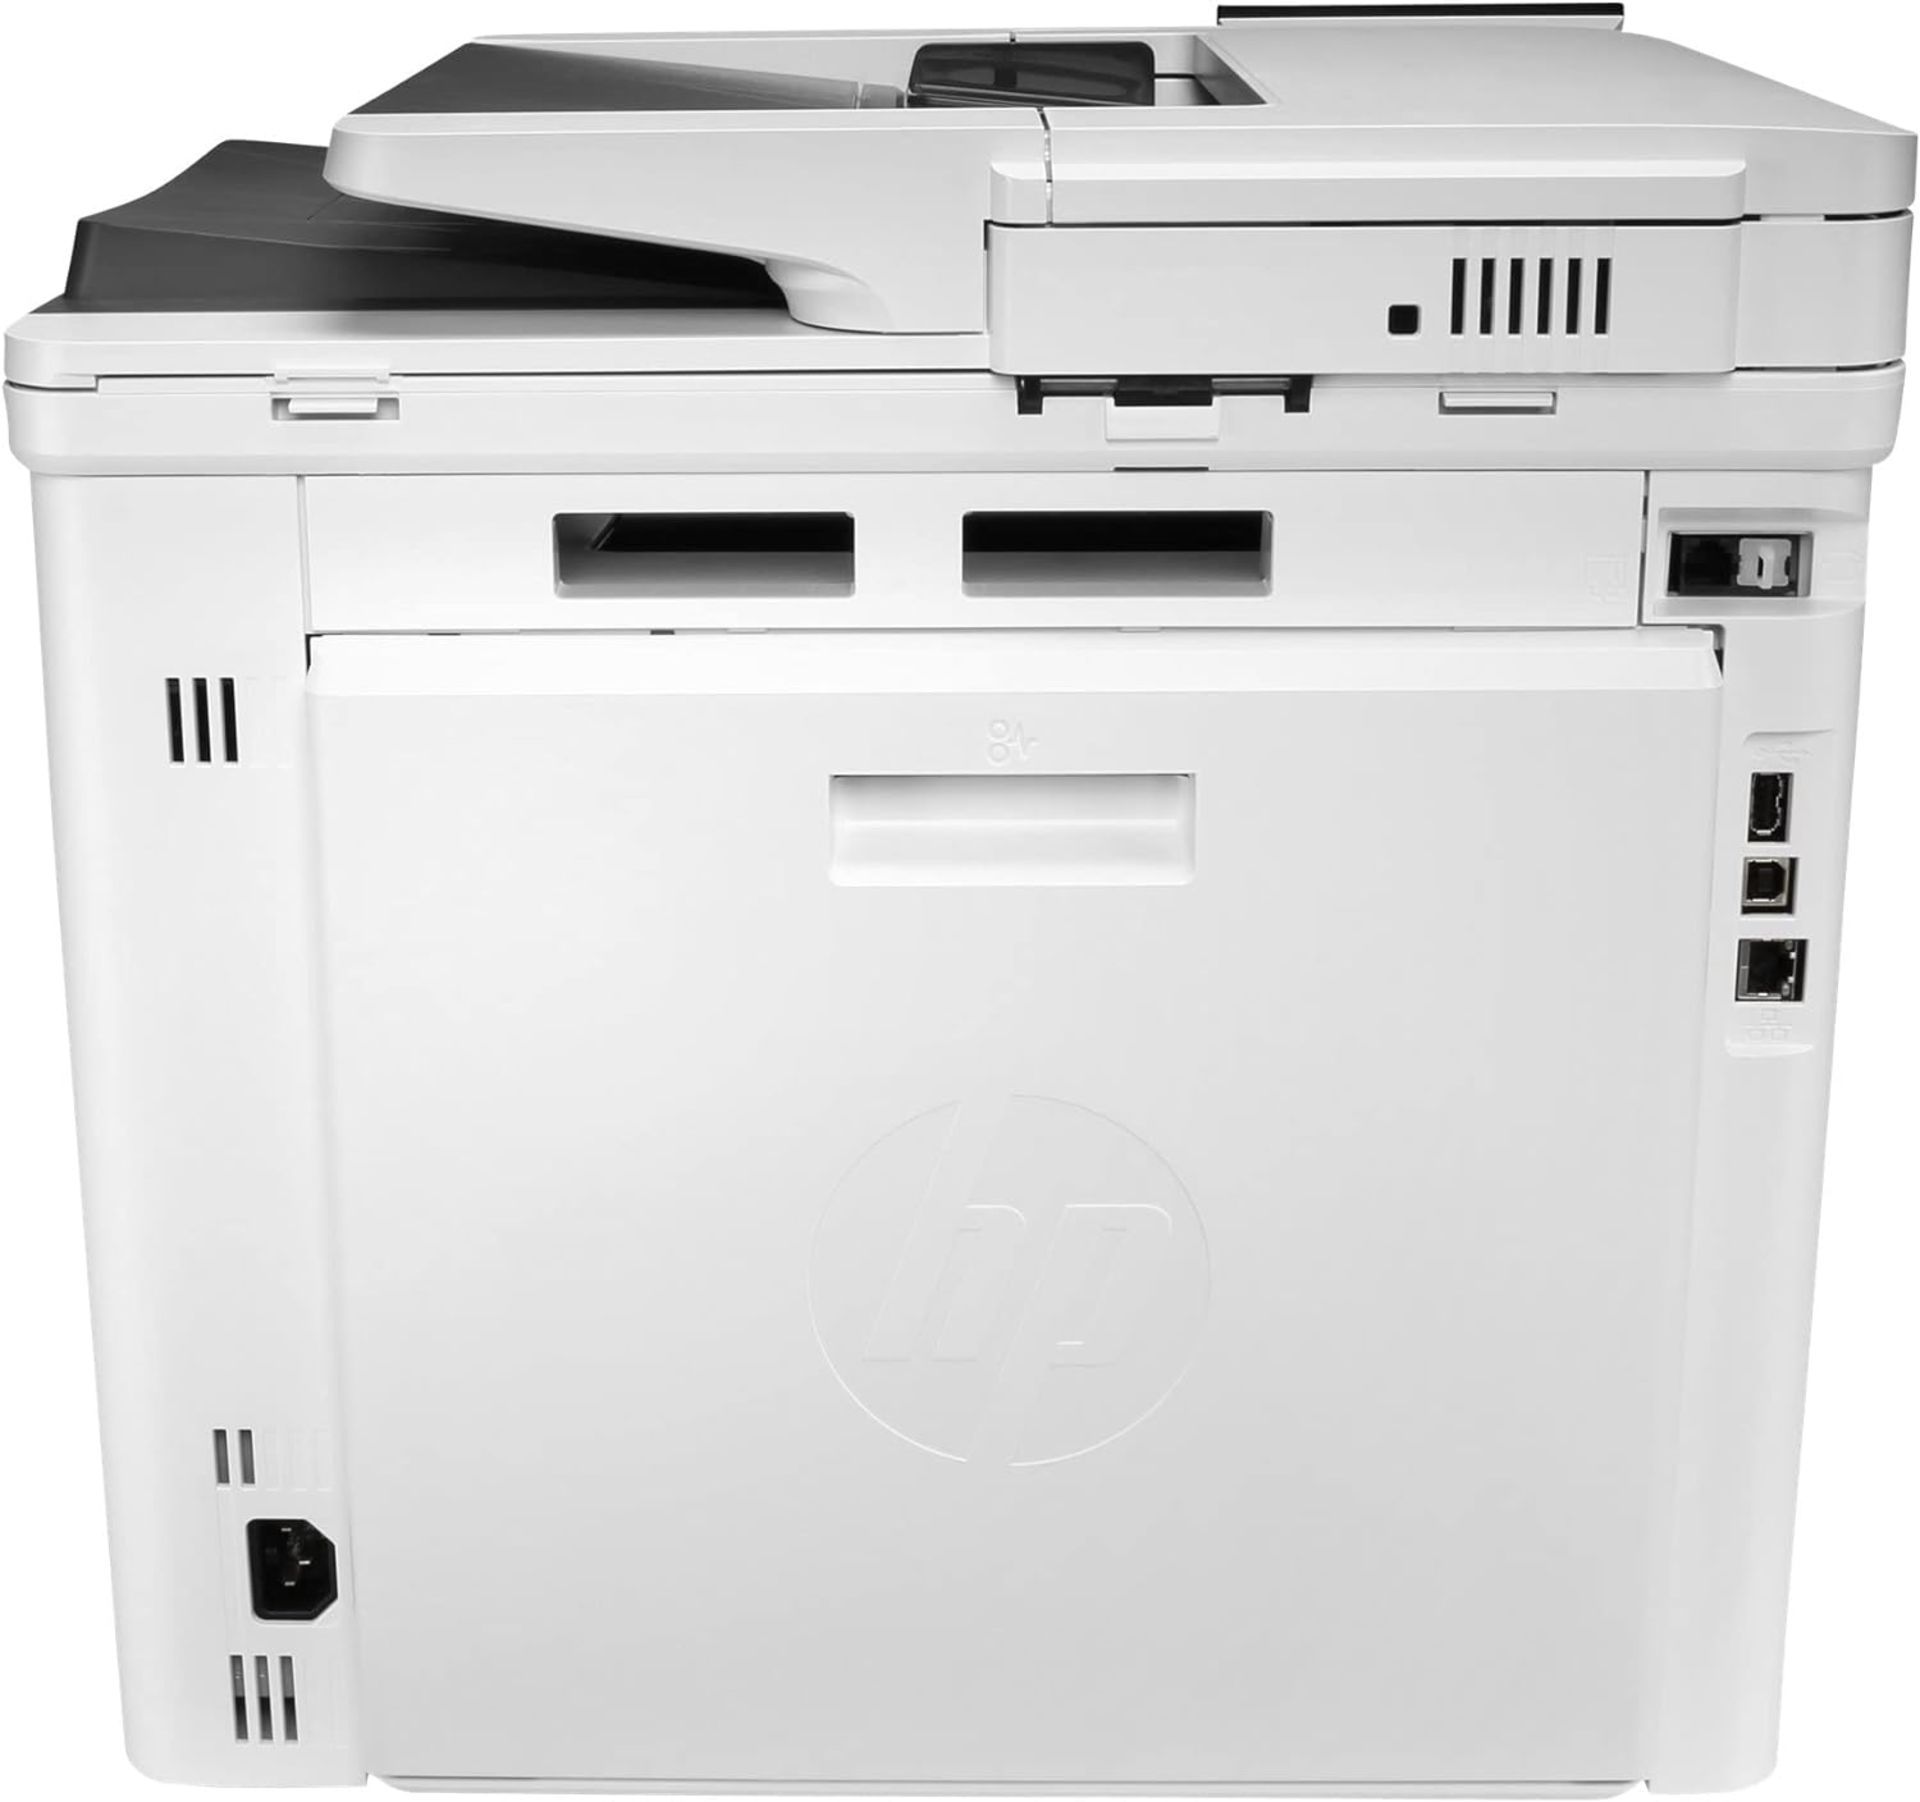 GRADE A HP Color LaserJet Enterprise MFP M480f. RRP £643. (PCK5). This printer is intended for use - Image 4 of 6